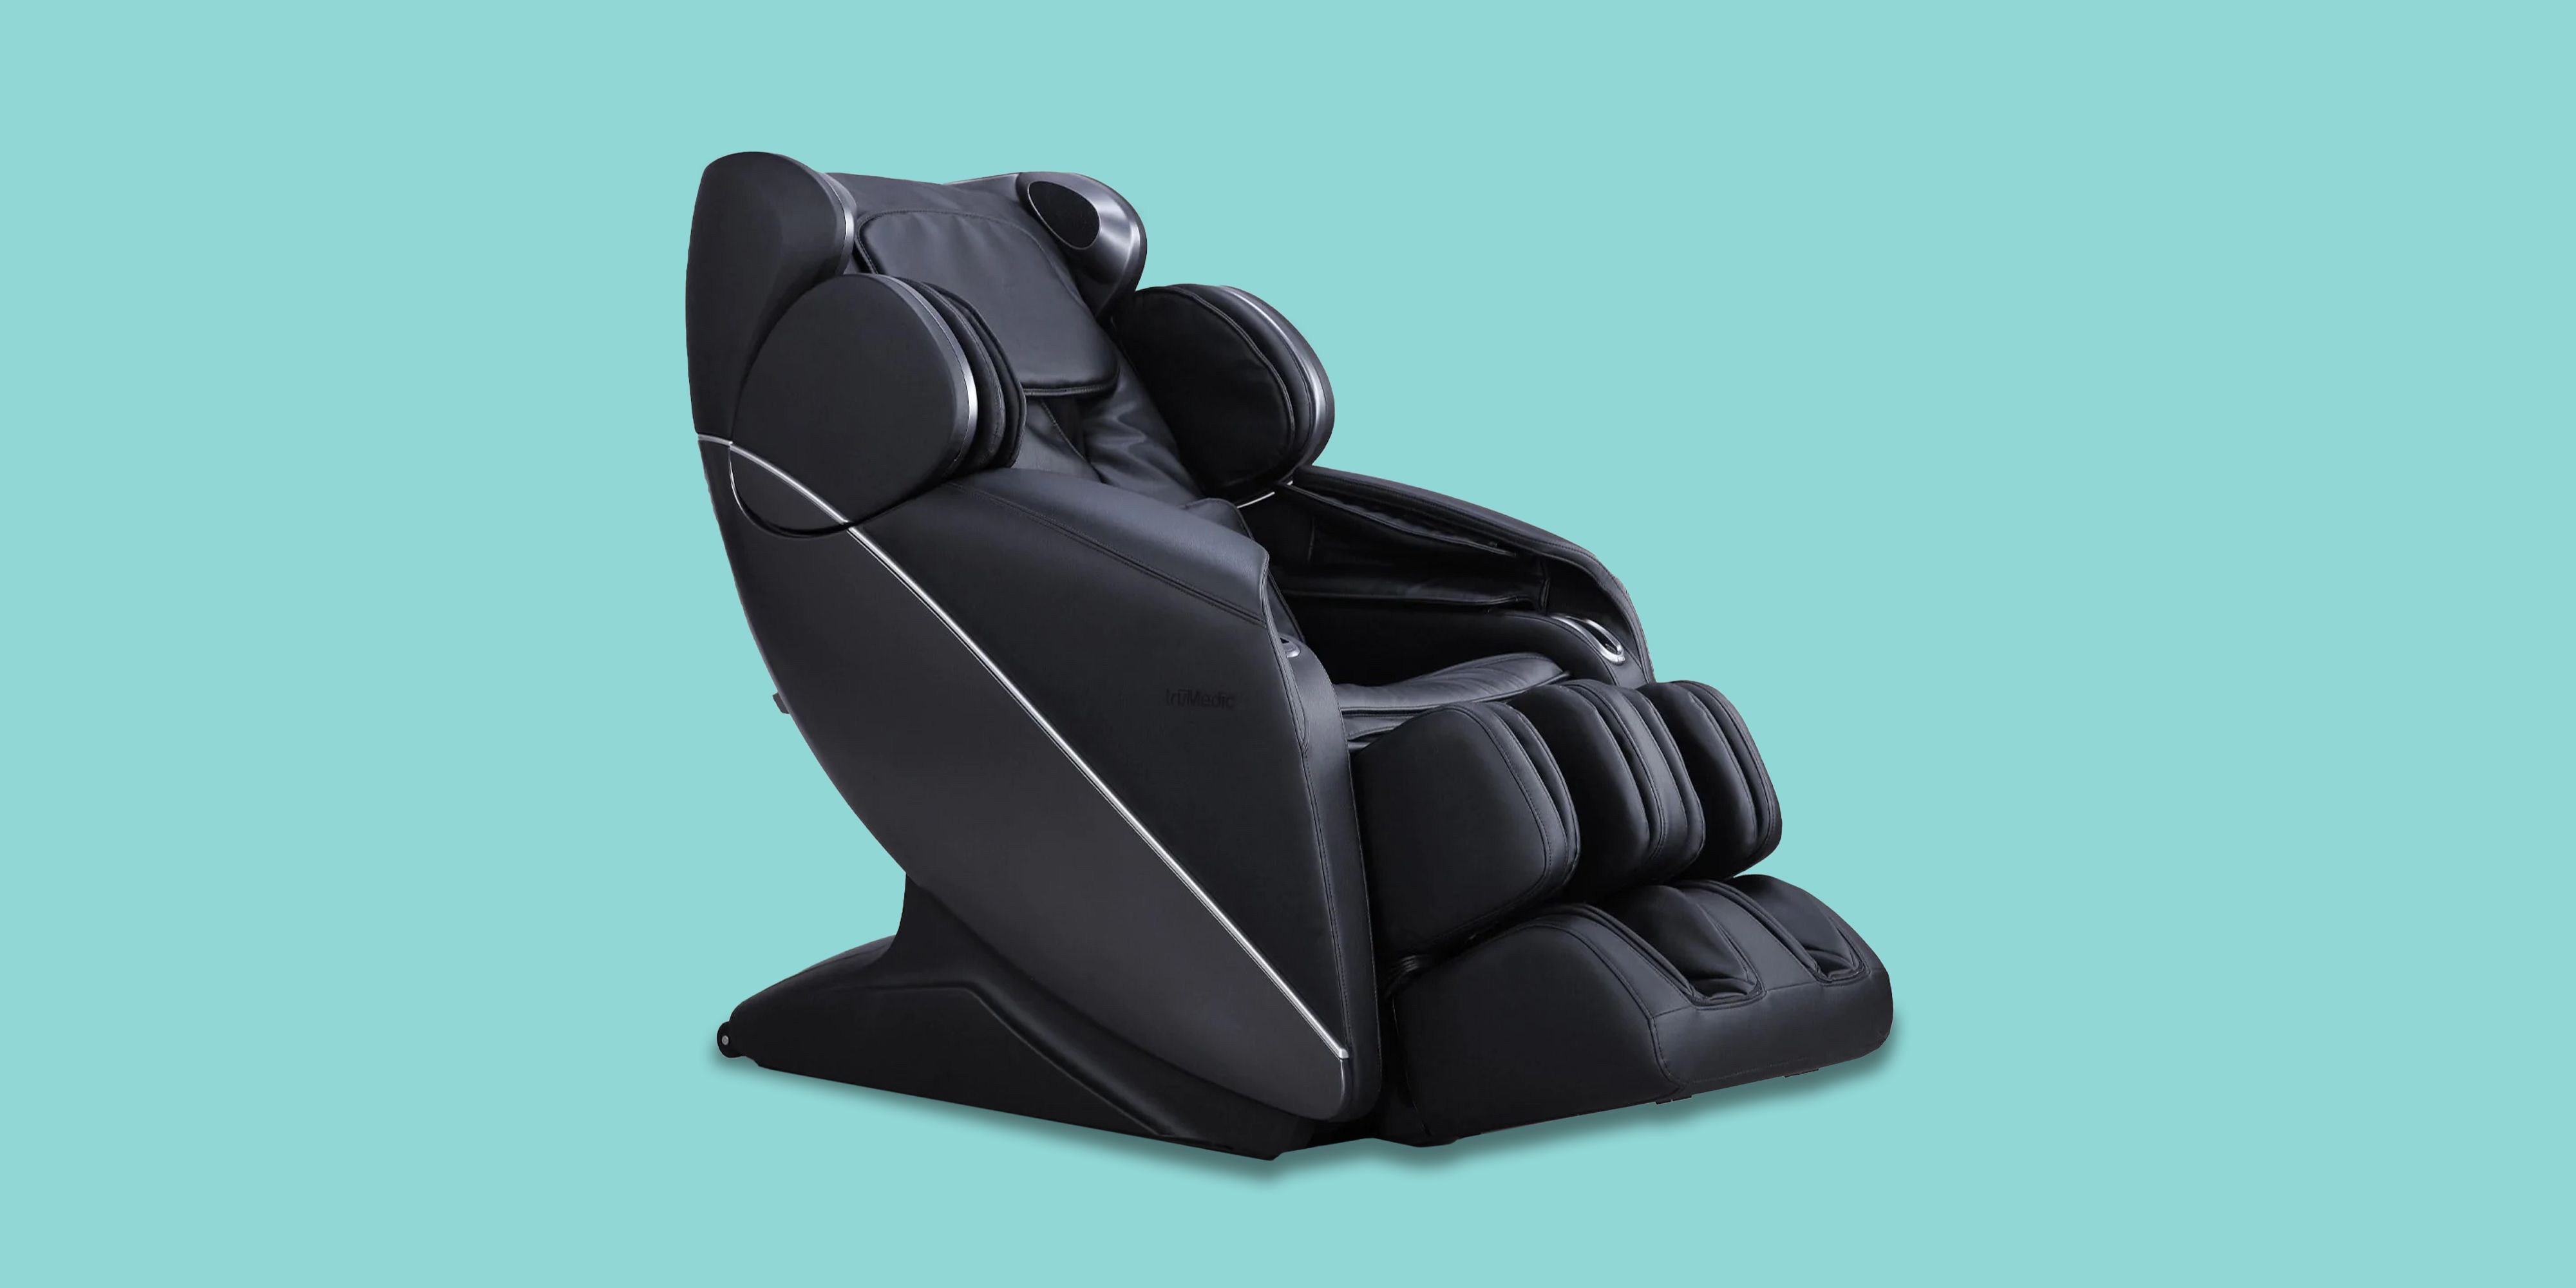 Do Massage Chairs Really Work? Find Out the Truth!